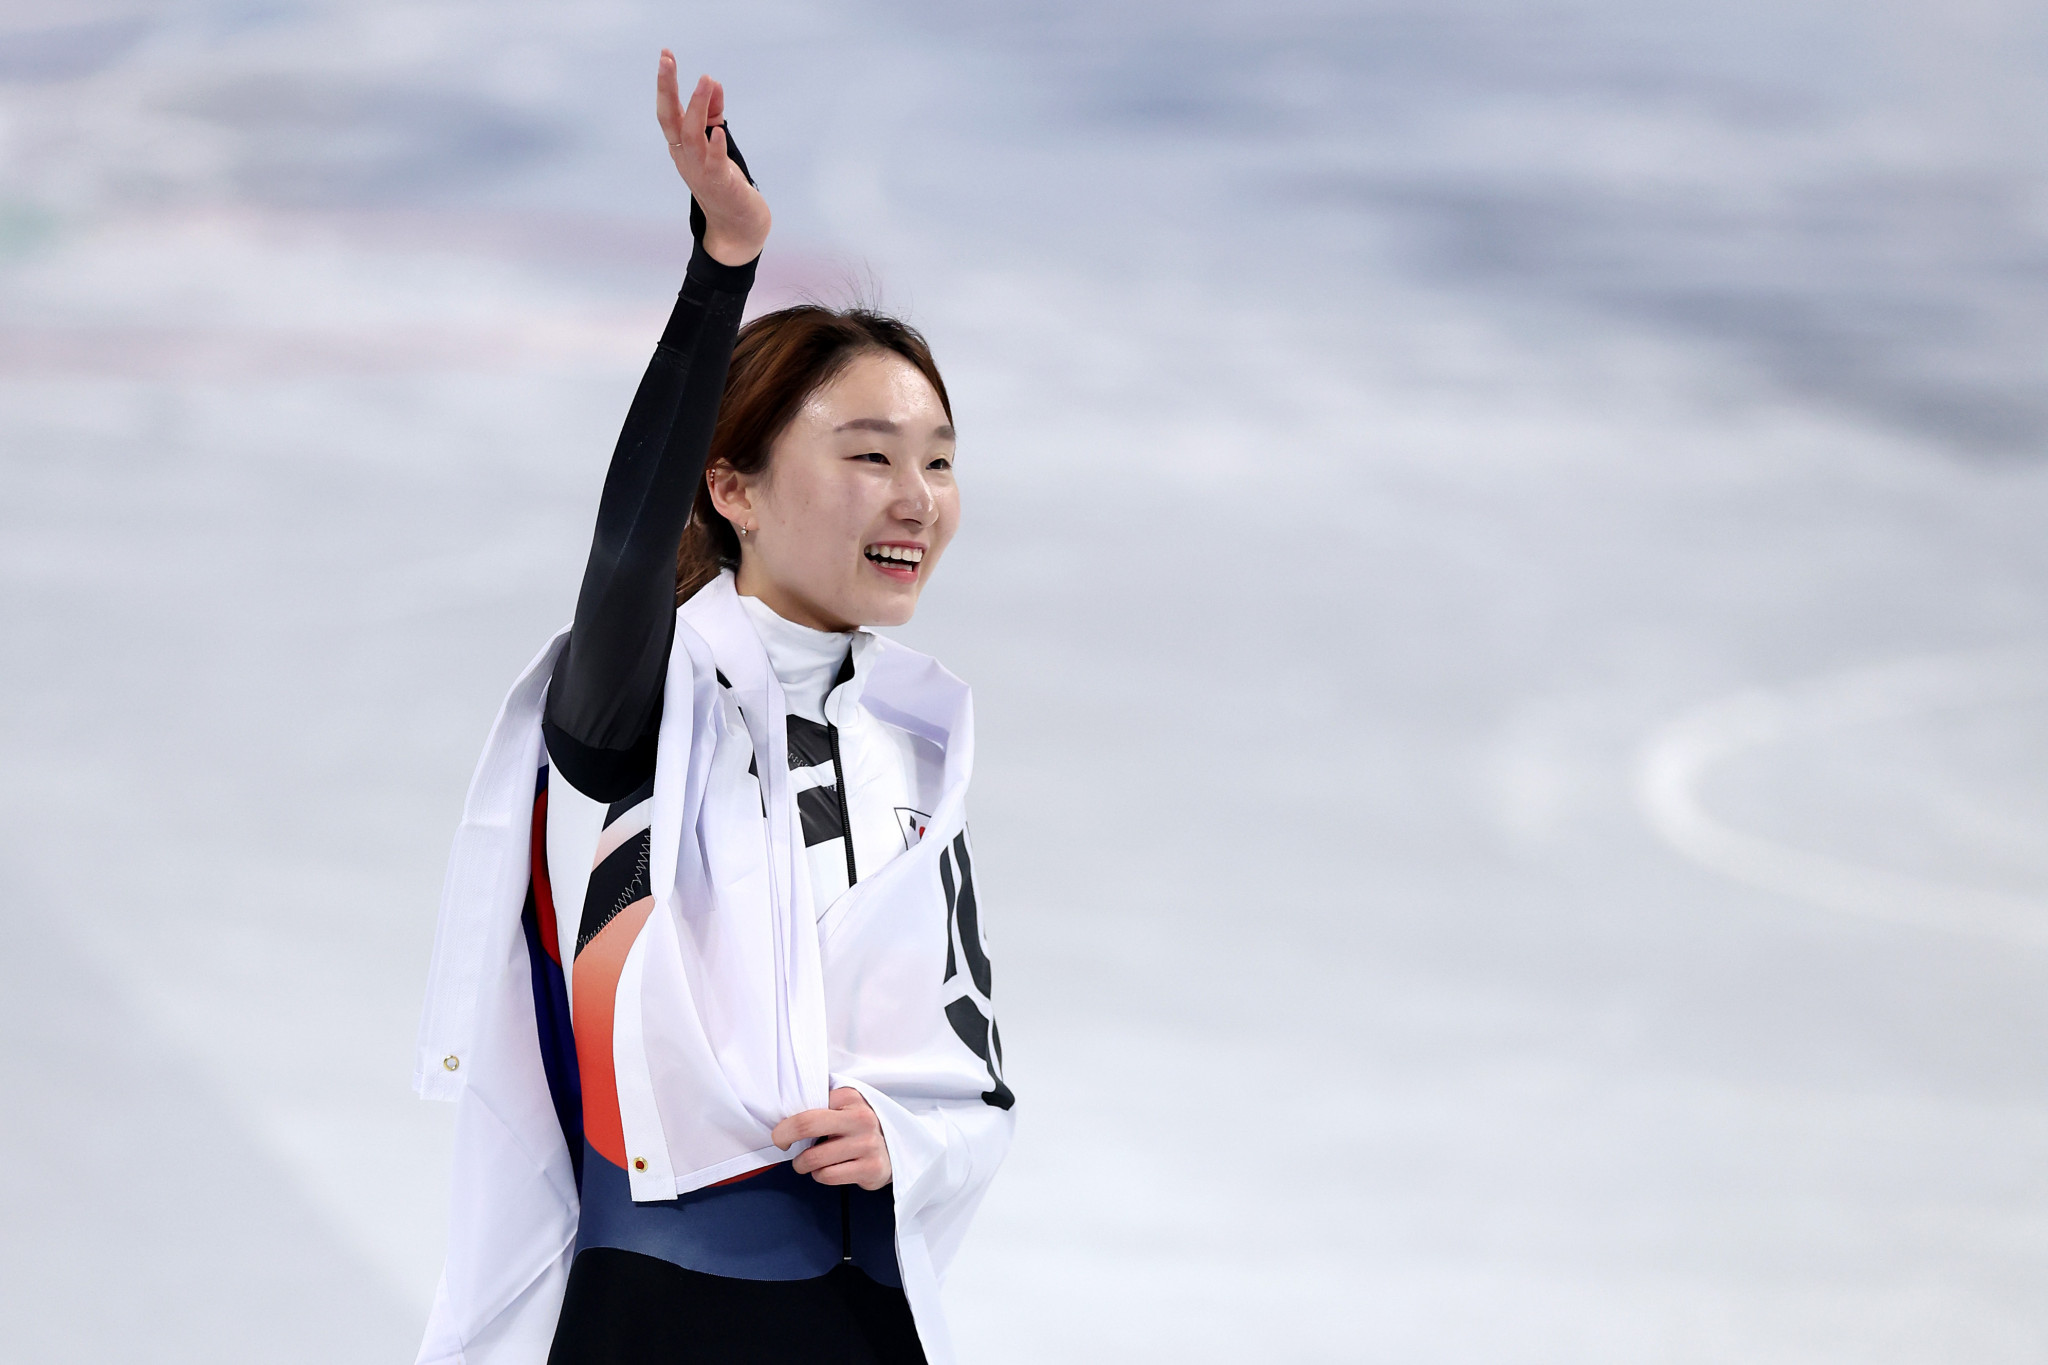 Home favourite Choi stars on first day of ISU World Short Track Speed Skating Championships in Seoul